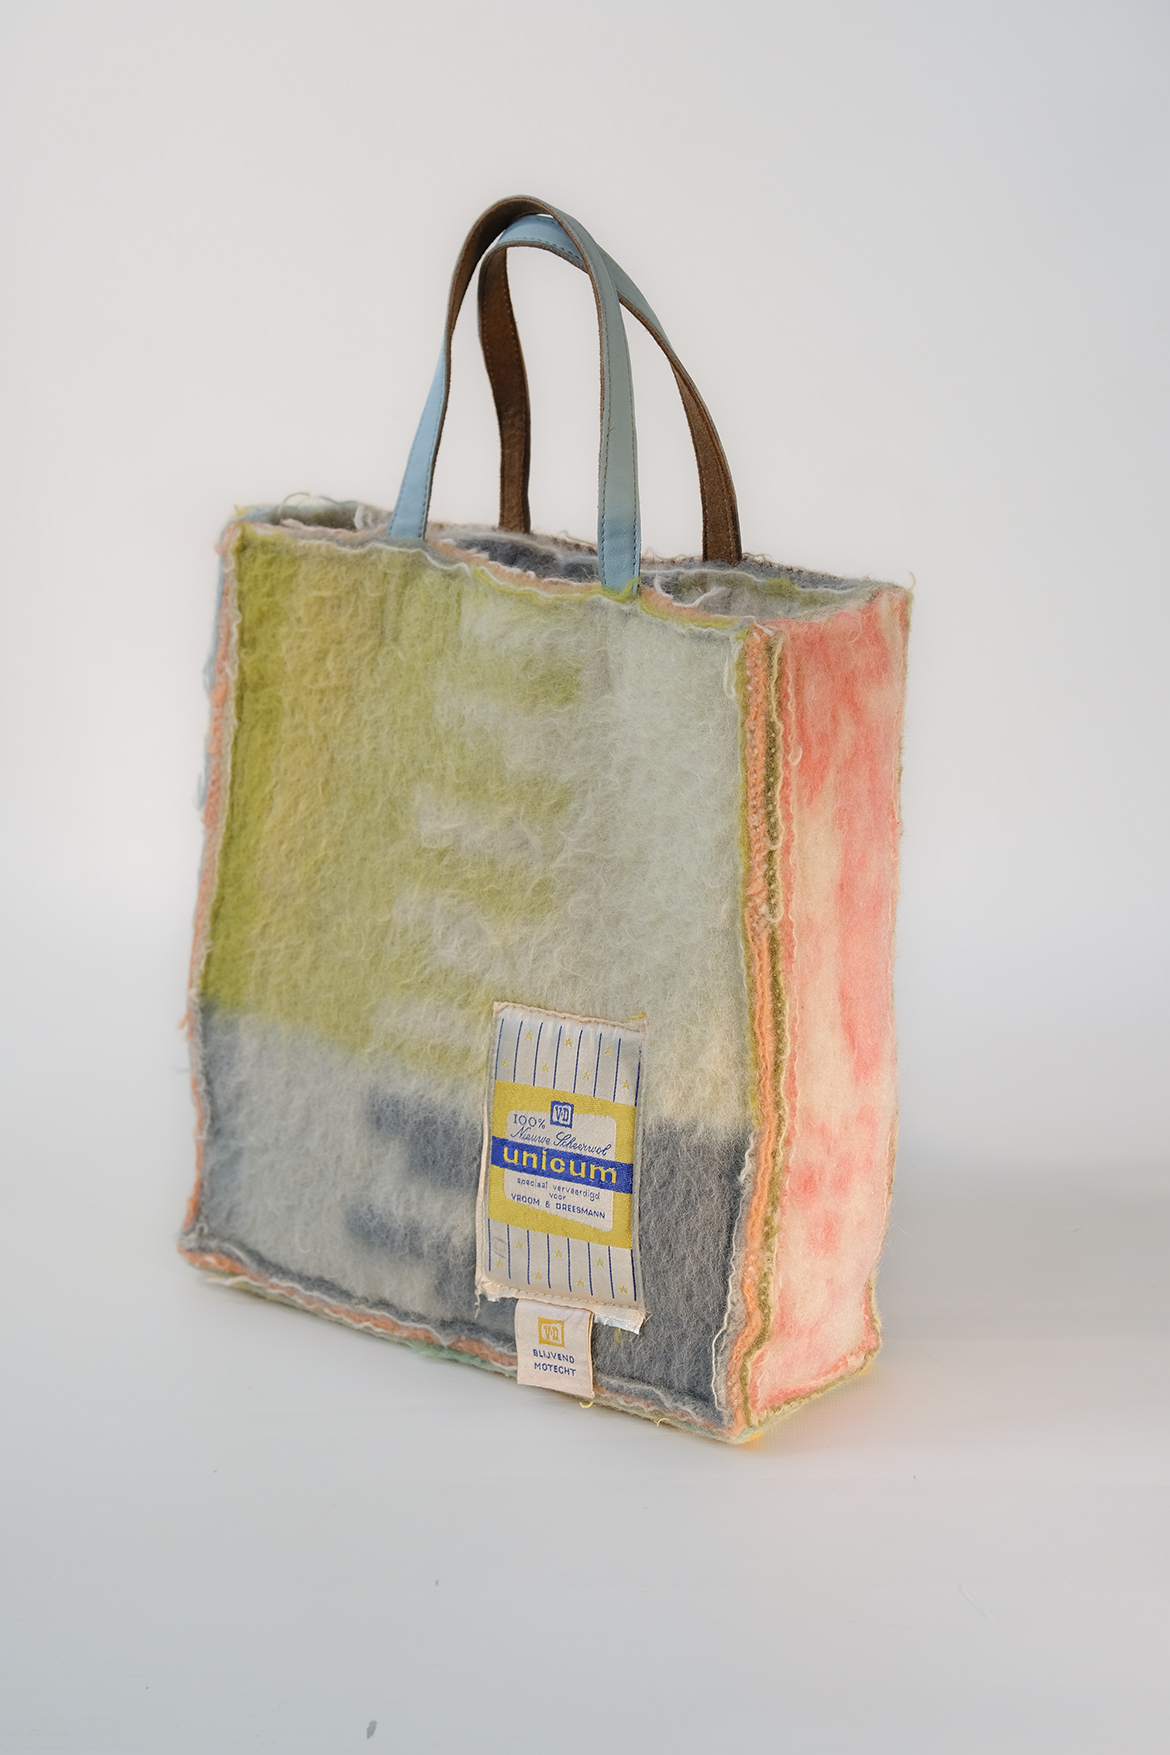 Unicum Layers Bag with original blanket label and short handles